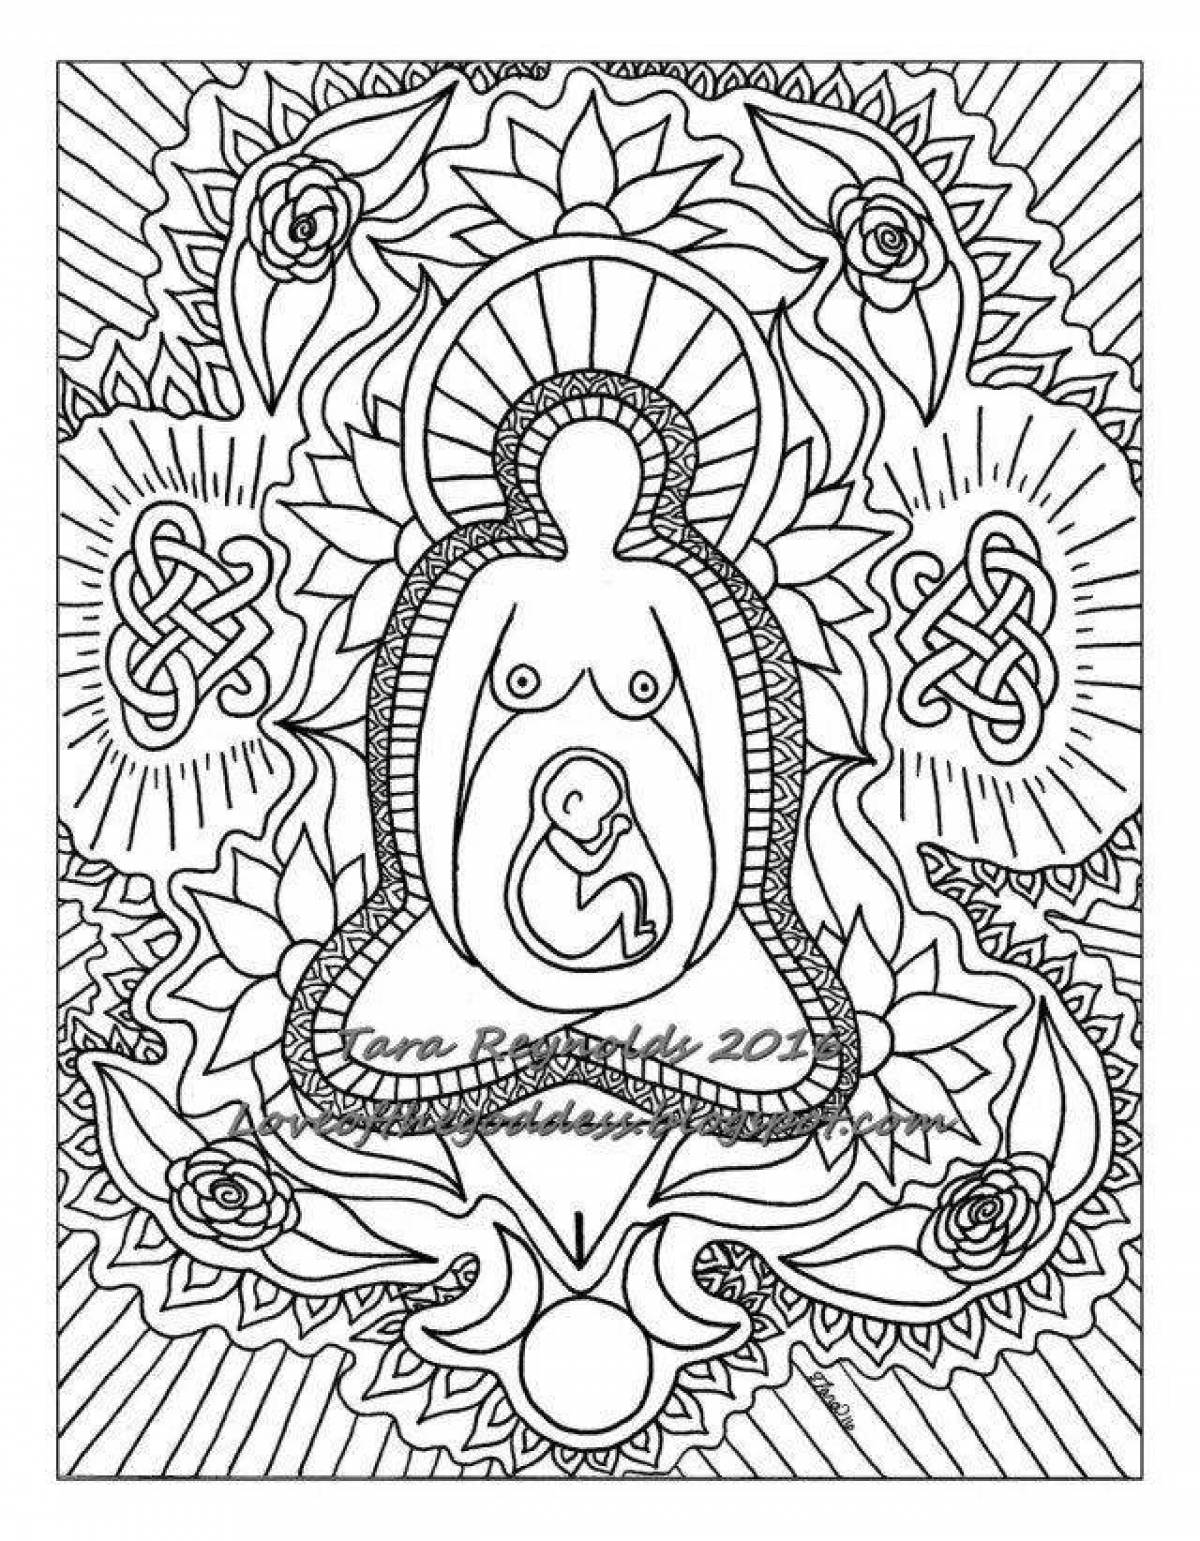 Refreshing pregnancy coloring page